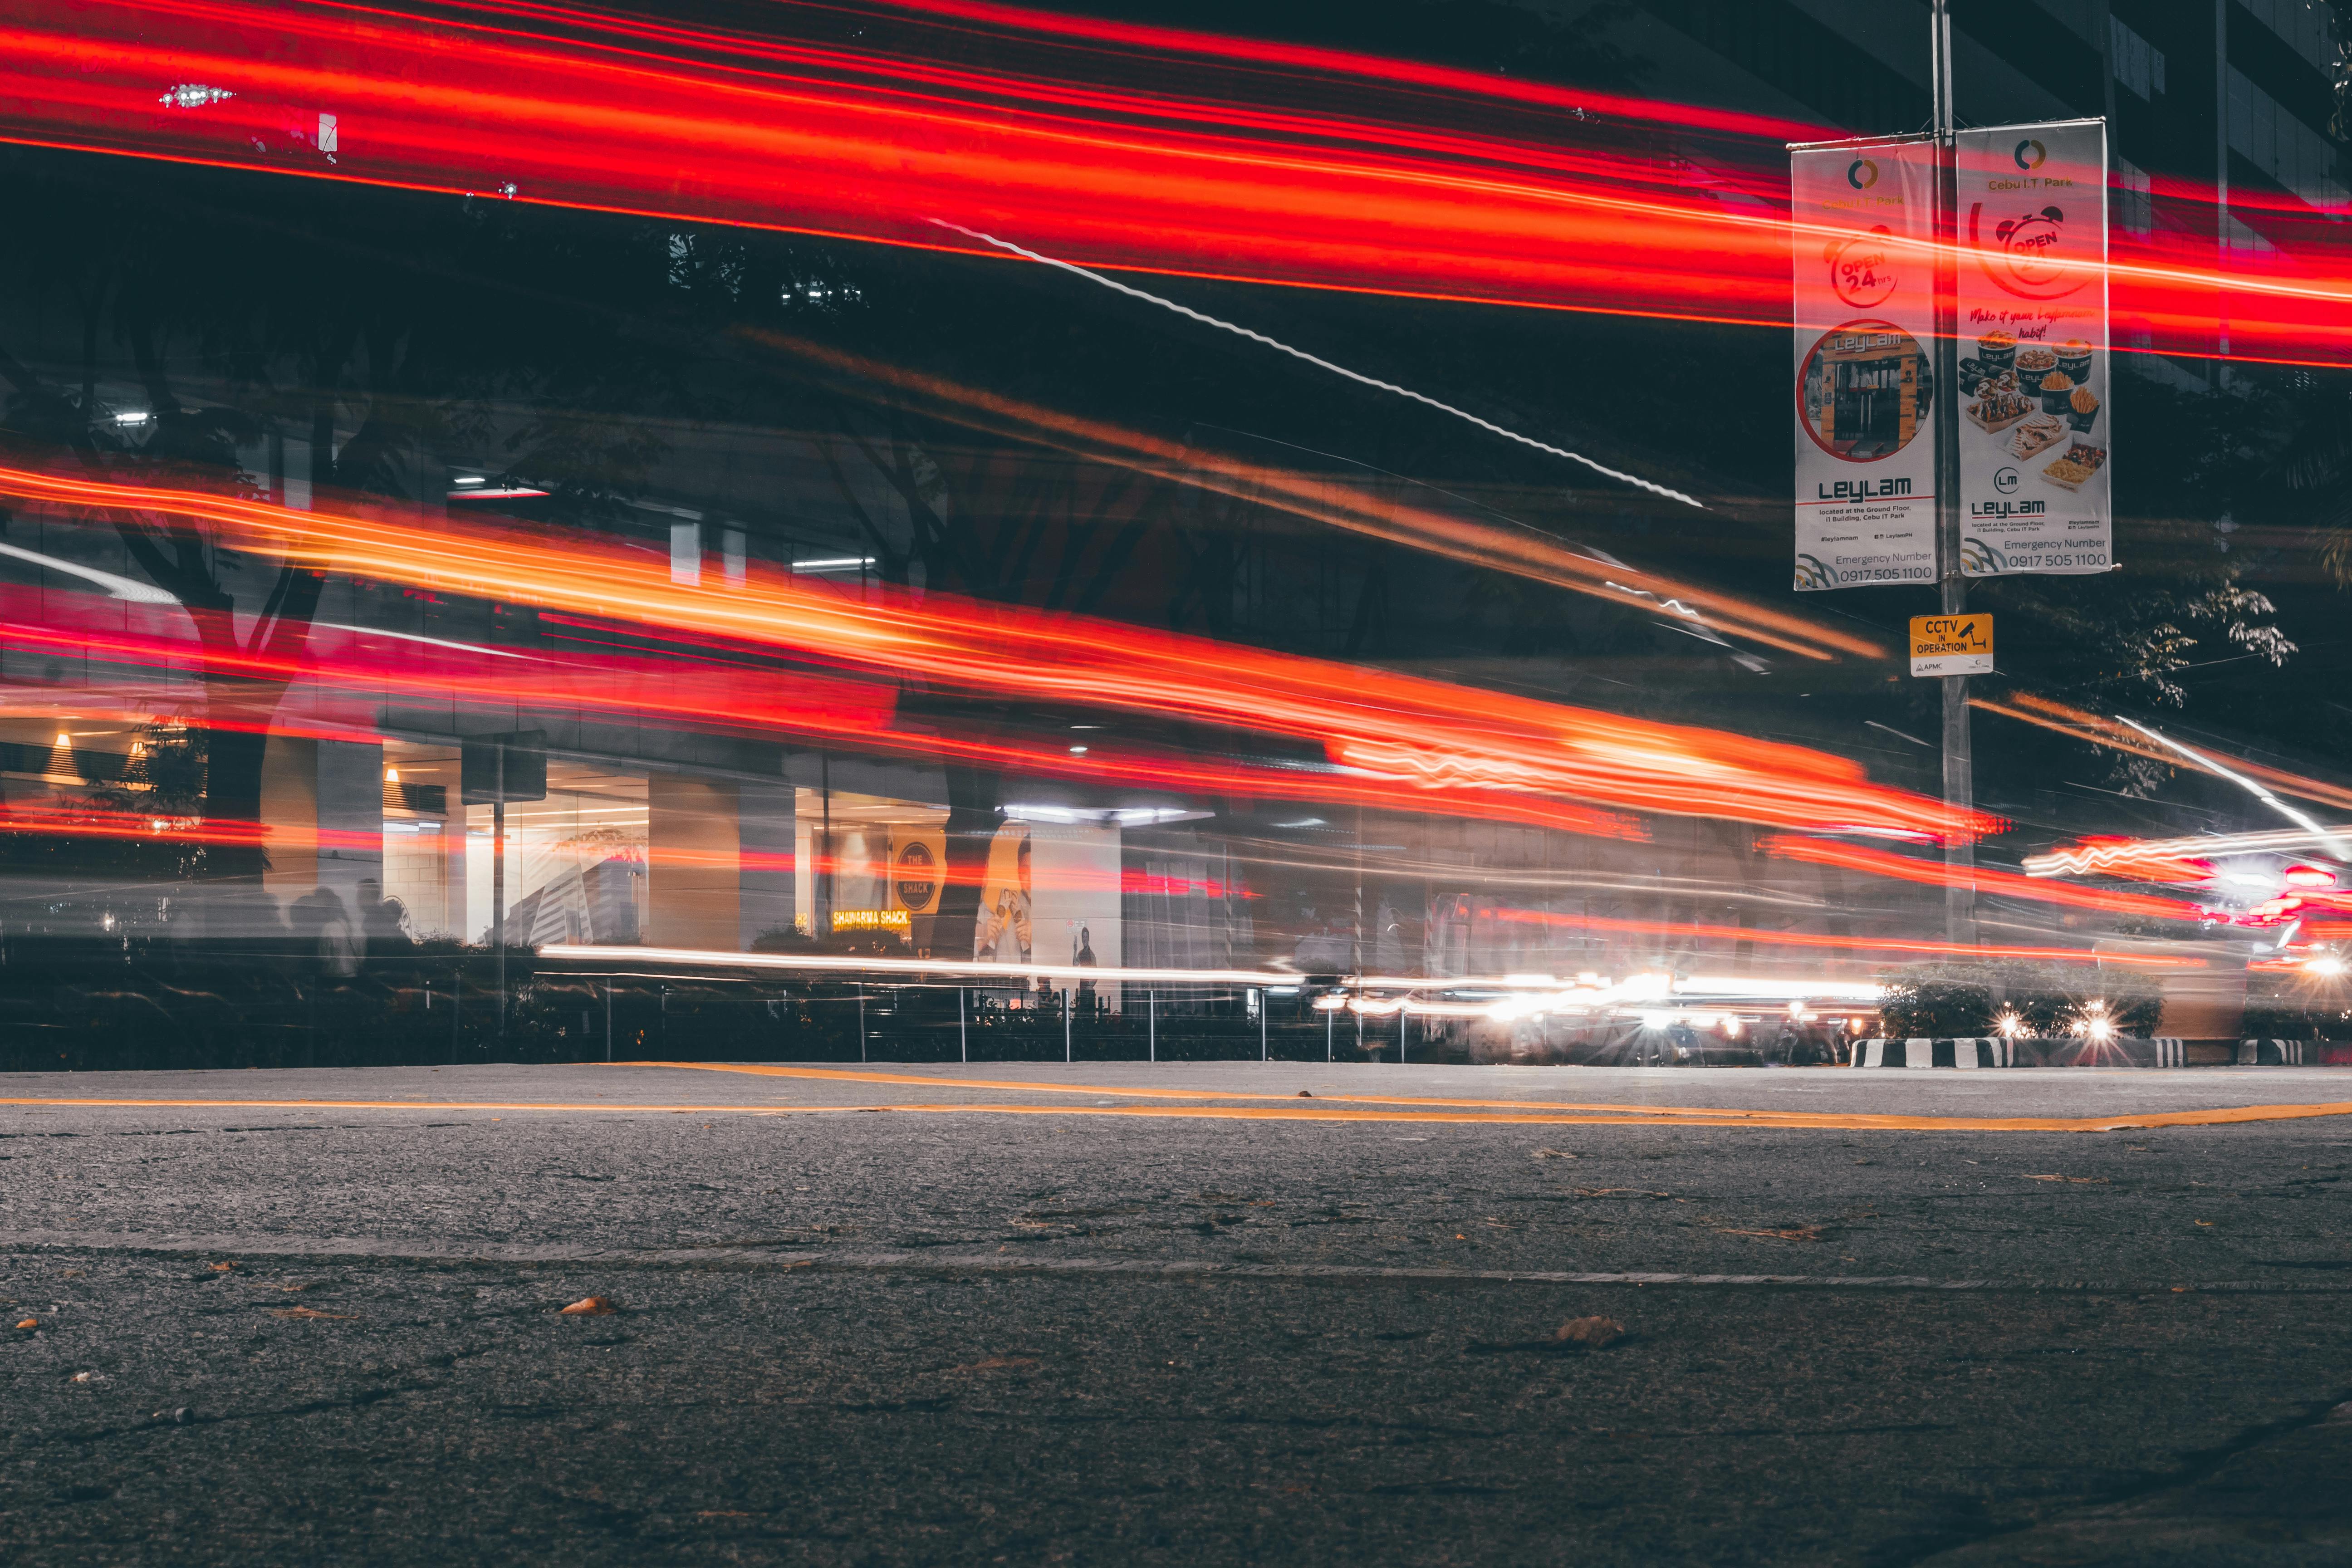 Time Lapse Photography Of Vehicles Passing On Road · Free Stock Photo